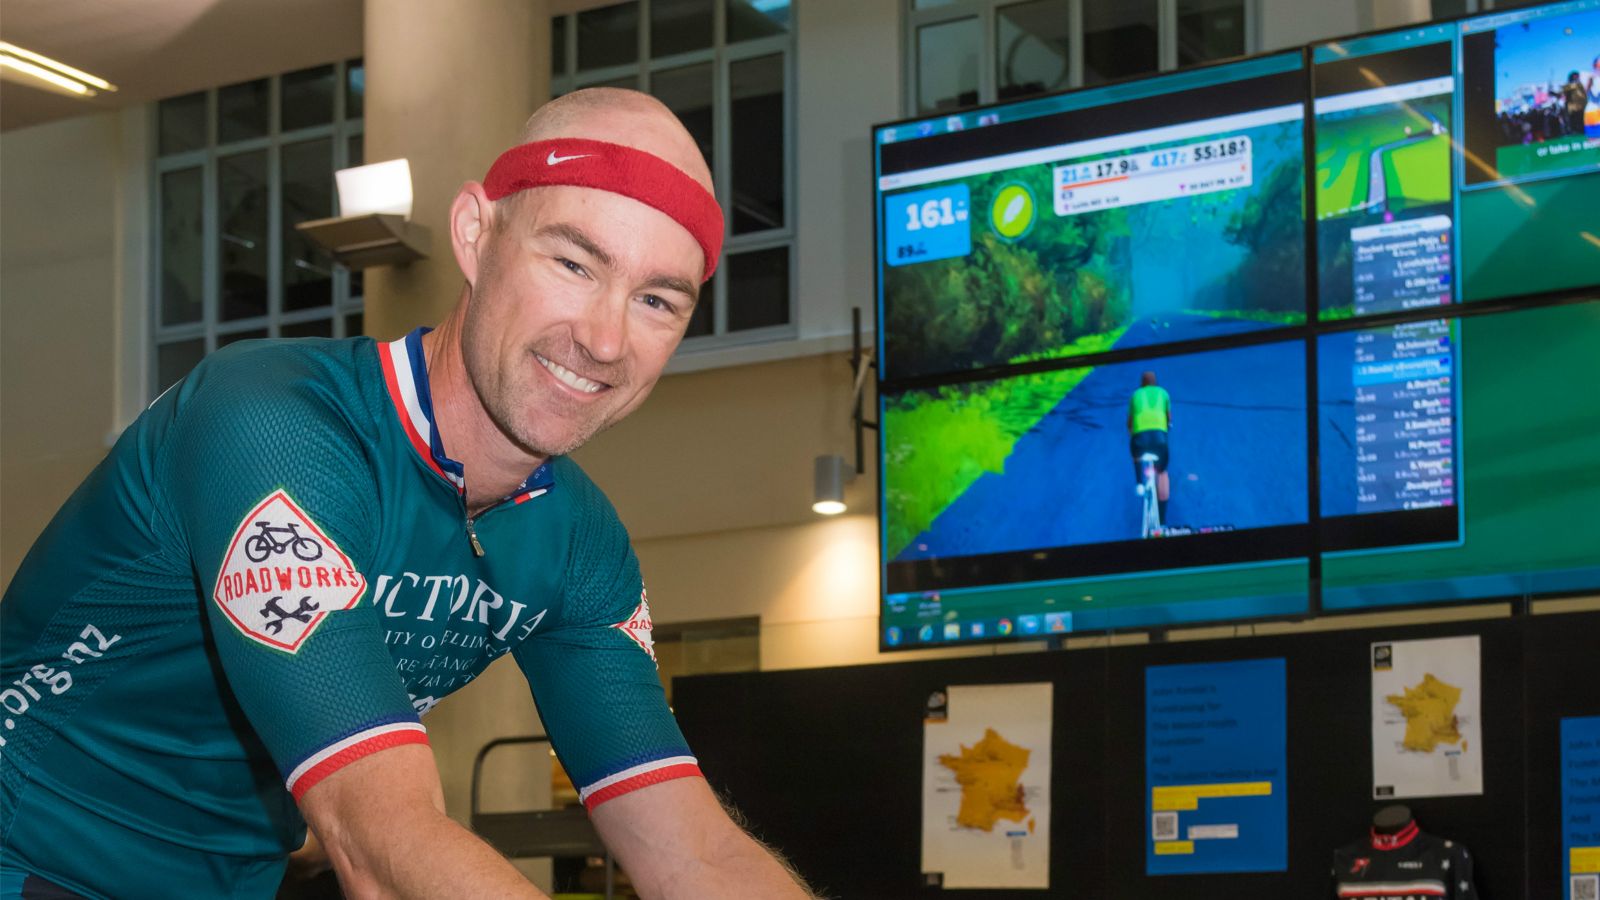 Dr John Randal rides a stationary bicycle with an image of a bicycle in an interactive simulation is presented on a large screeen.